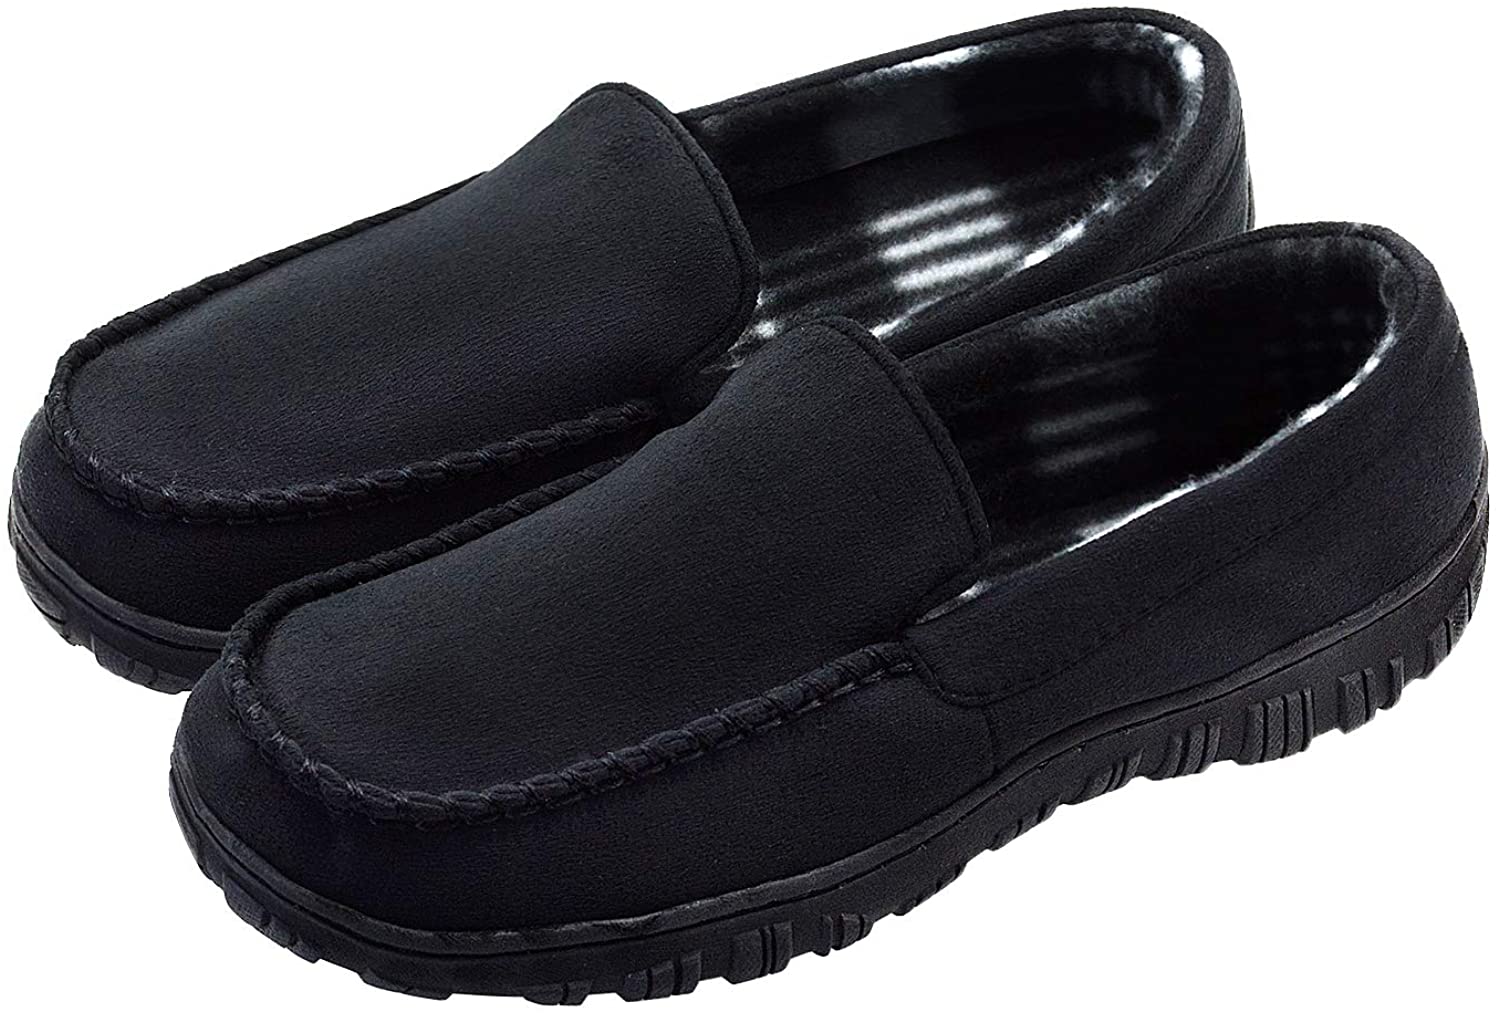 LseLom Mens-Slippers-Moccasin-Microsuede-Slip-on-Indoor-Outdoor House Slippers Memory Foam House Shoes 